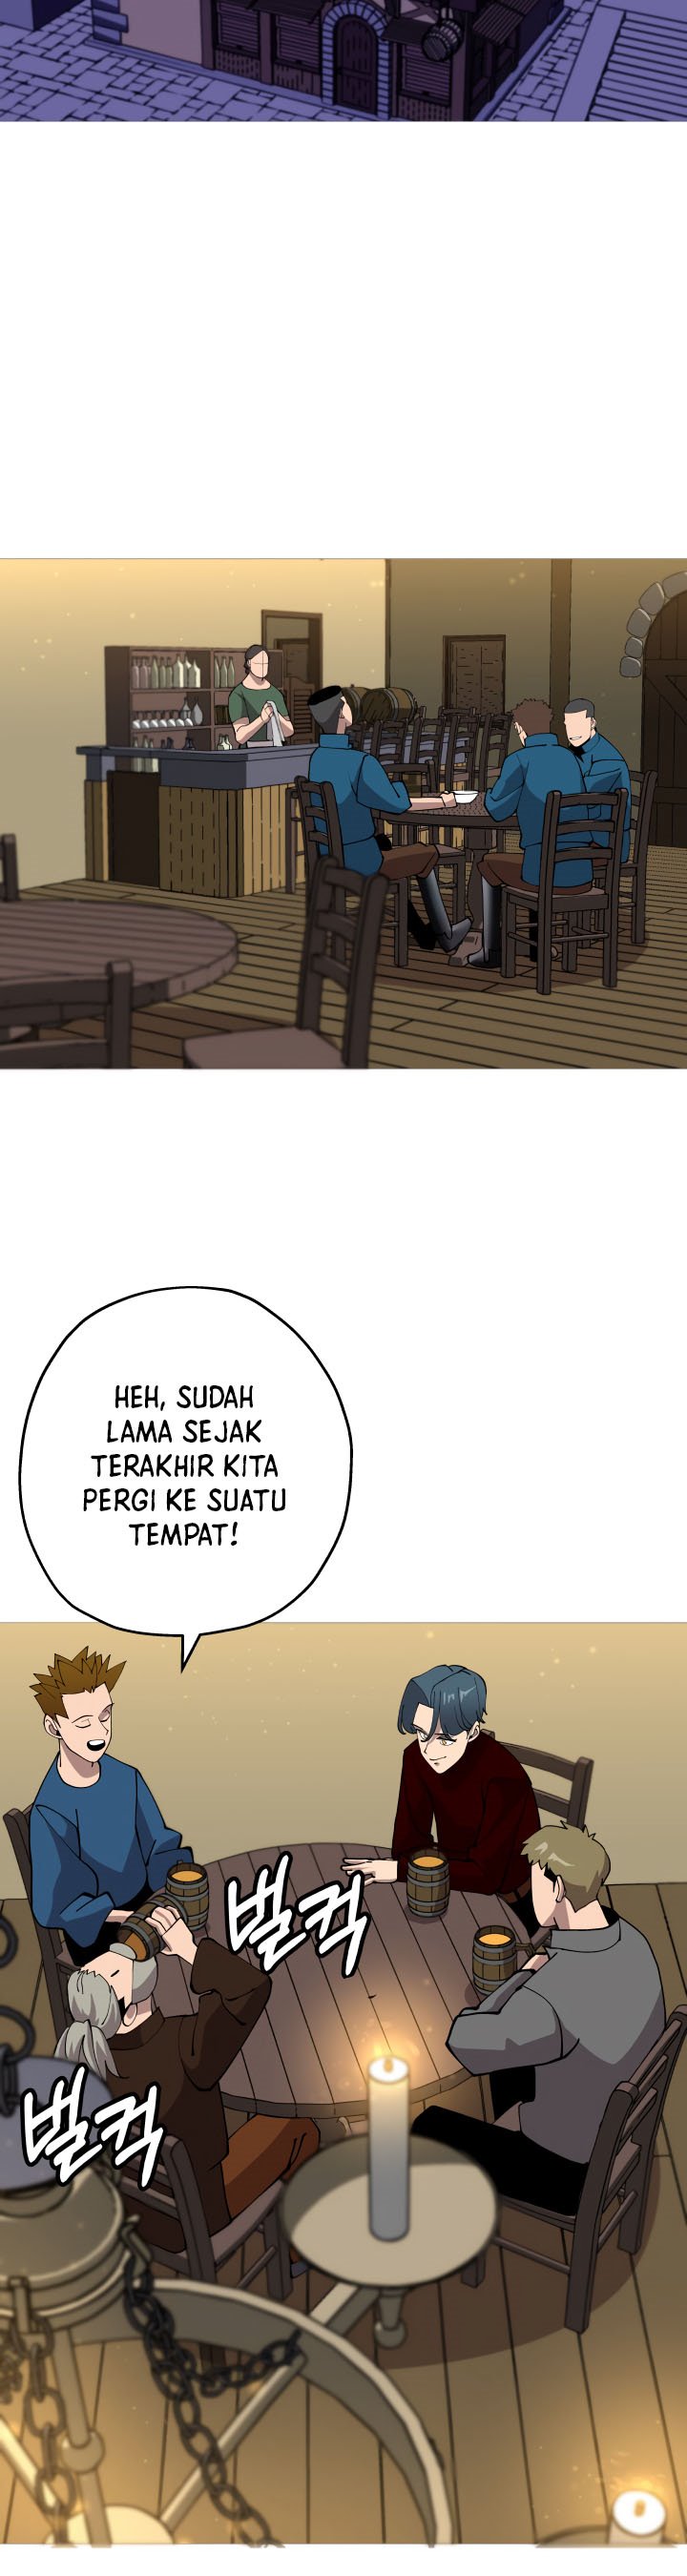 Dilarang COPAS - situs resmi www.mangacanblog.com - Komik the story of a low rank soldier becoming a monarch 023 - chapter 23 24 Indonesia the story of a low rank soldier becoming a monarch 023 - chapter 23 Terbaru 6|Baca Manga Komik Indonesia|Mangacan